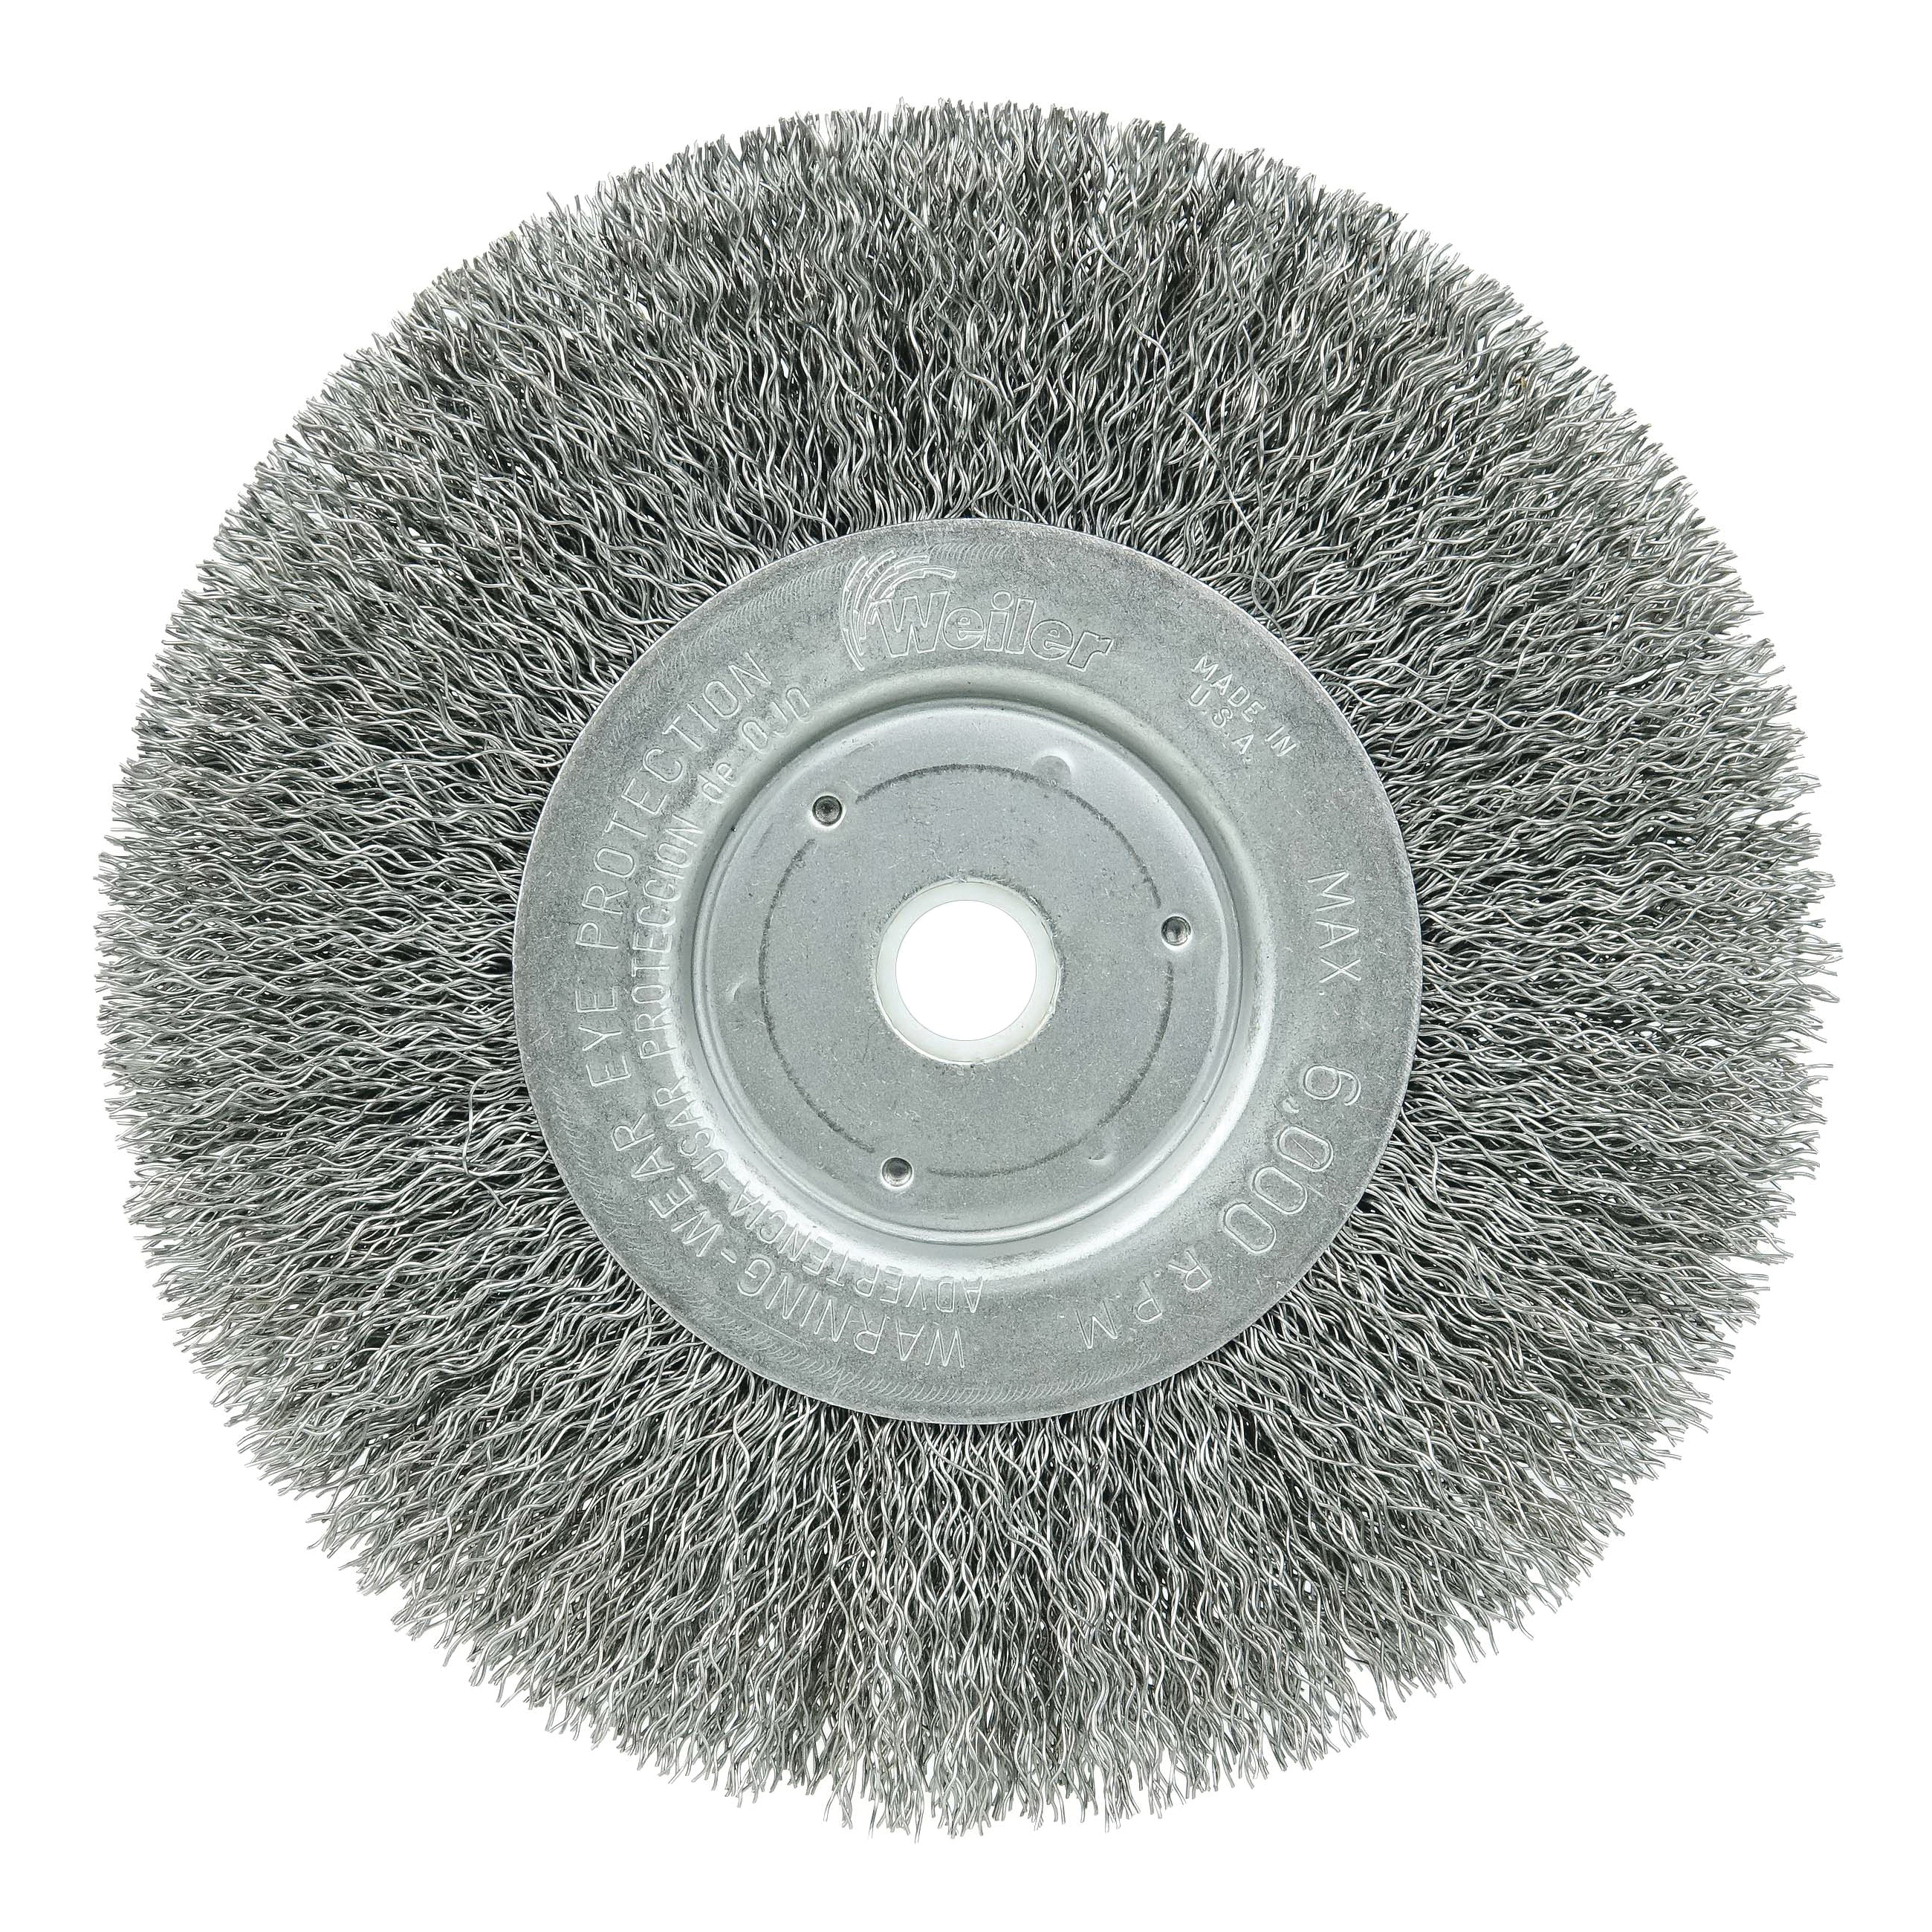 Weiler® 01068 Narrow Face Wheel Brush, 6 in Dia Brush, 3/4 in W Face, 0.0118 in Dia Crimped Filament/Wire, 3/4 in Arbor Hole